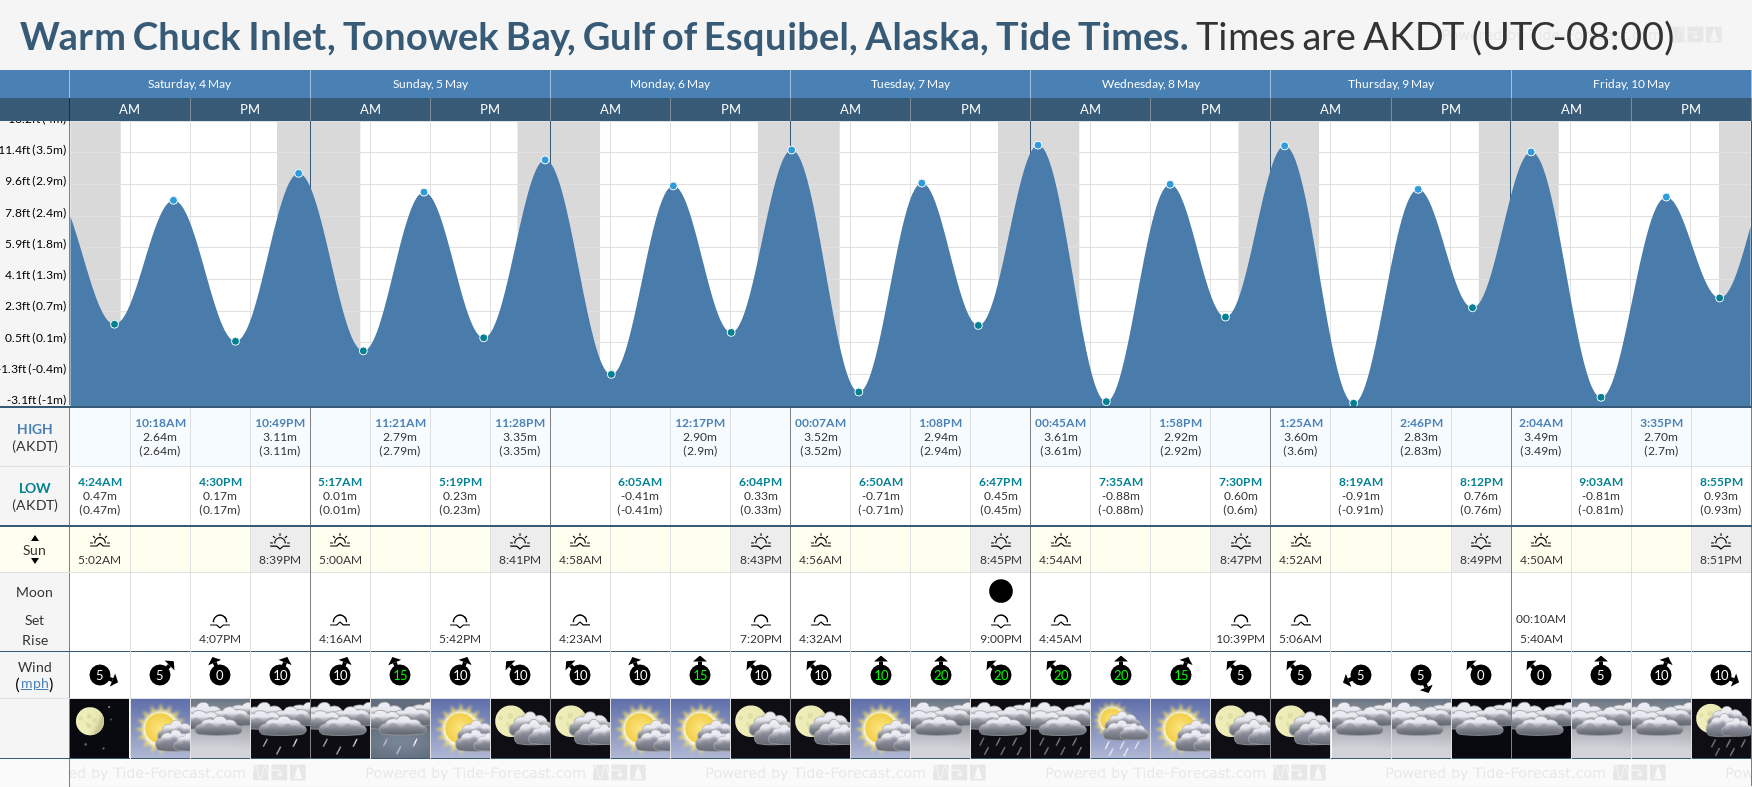 Warm Chuck Inlet, Tonowek Bay, Gulf of Esquibel, Alaska Tide Chart including high and low tide tide times for the next 7 days